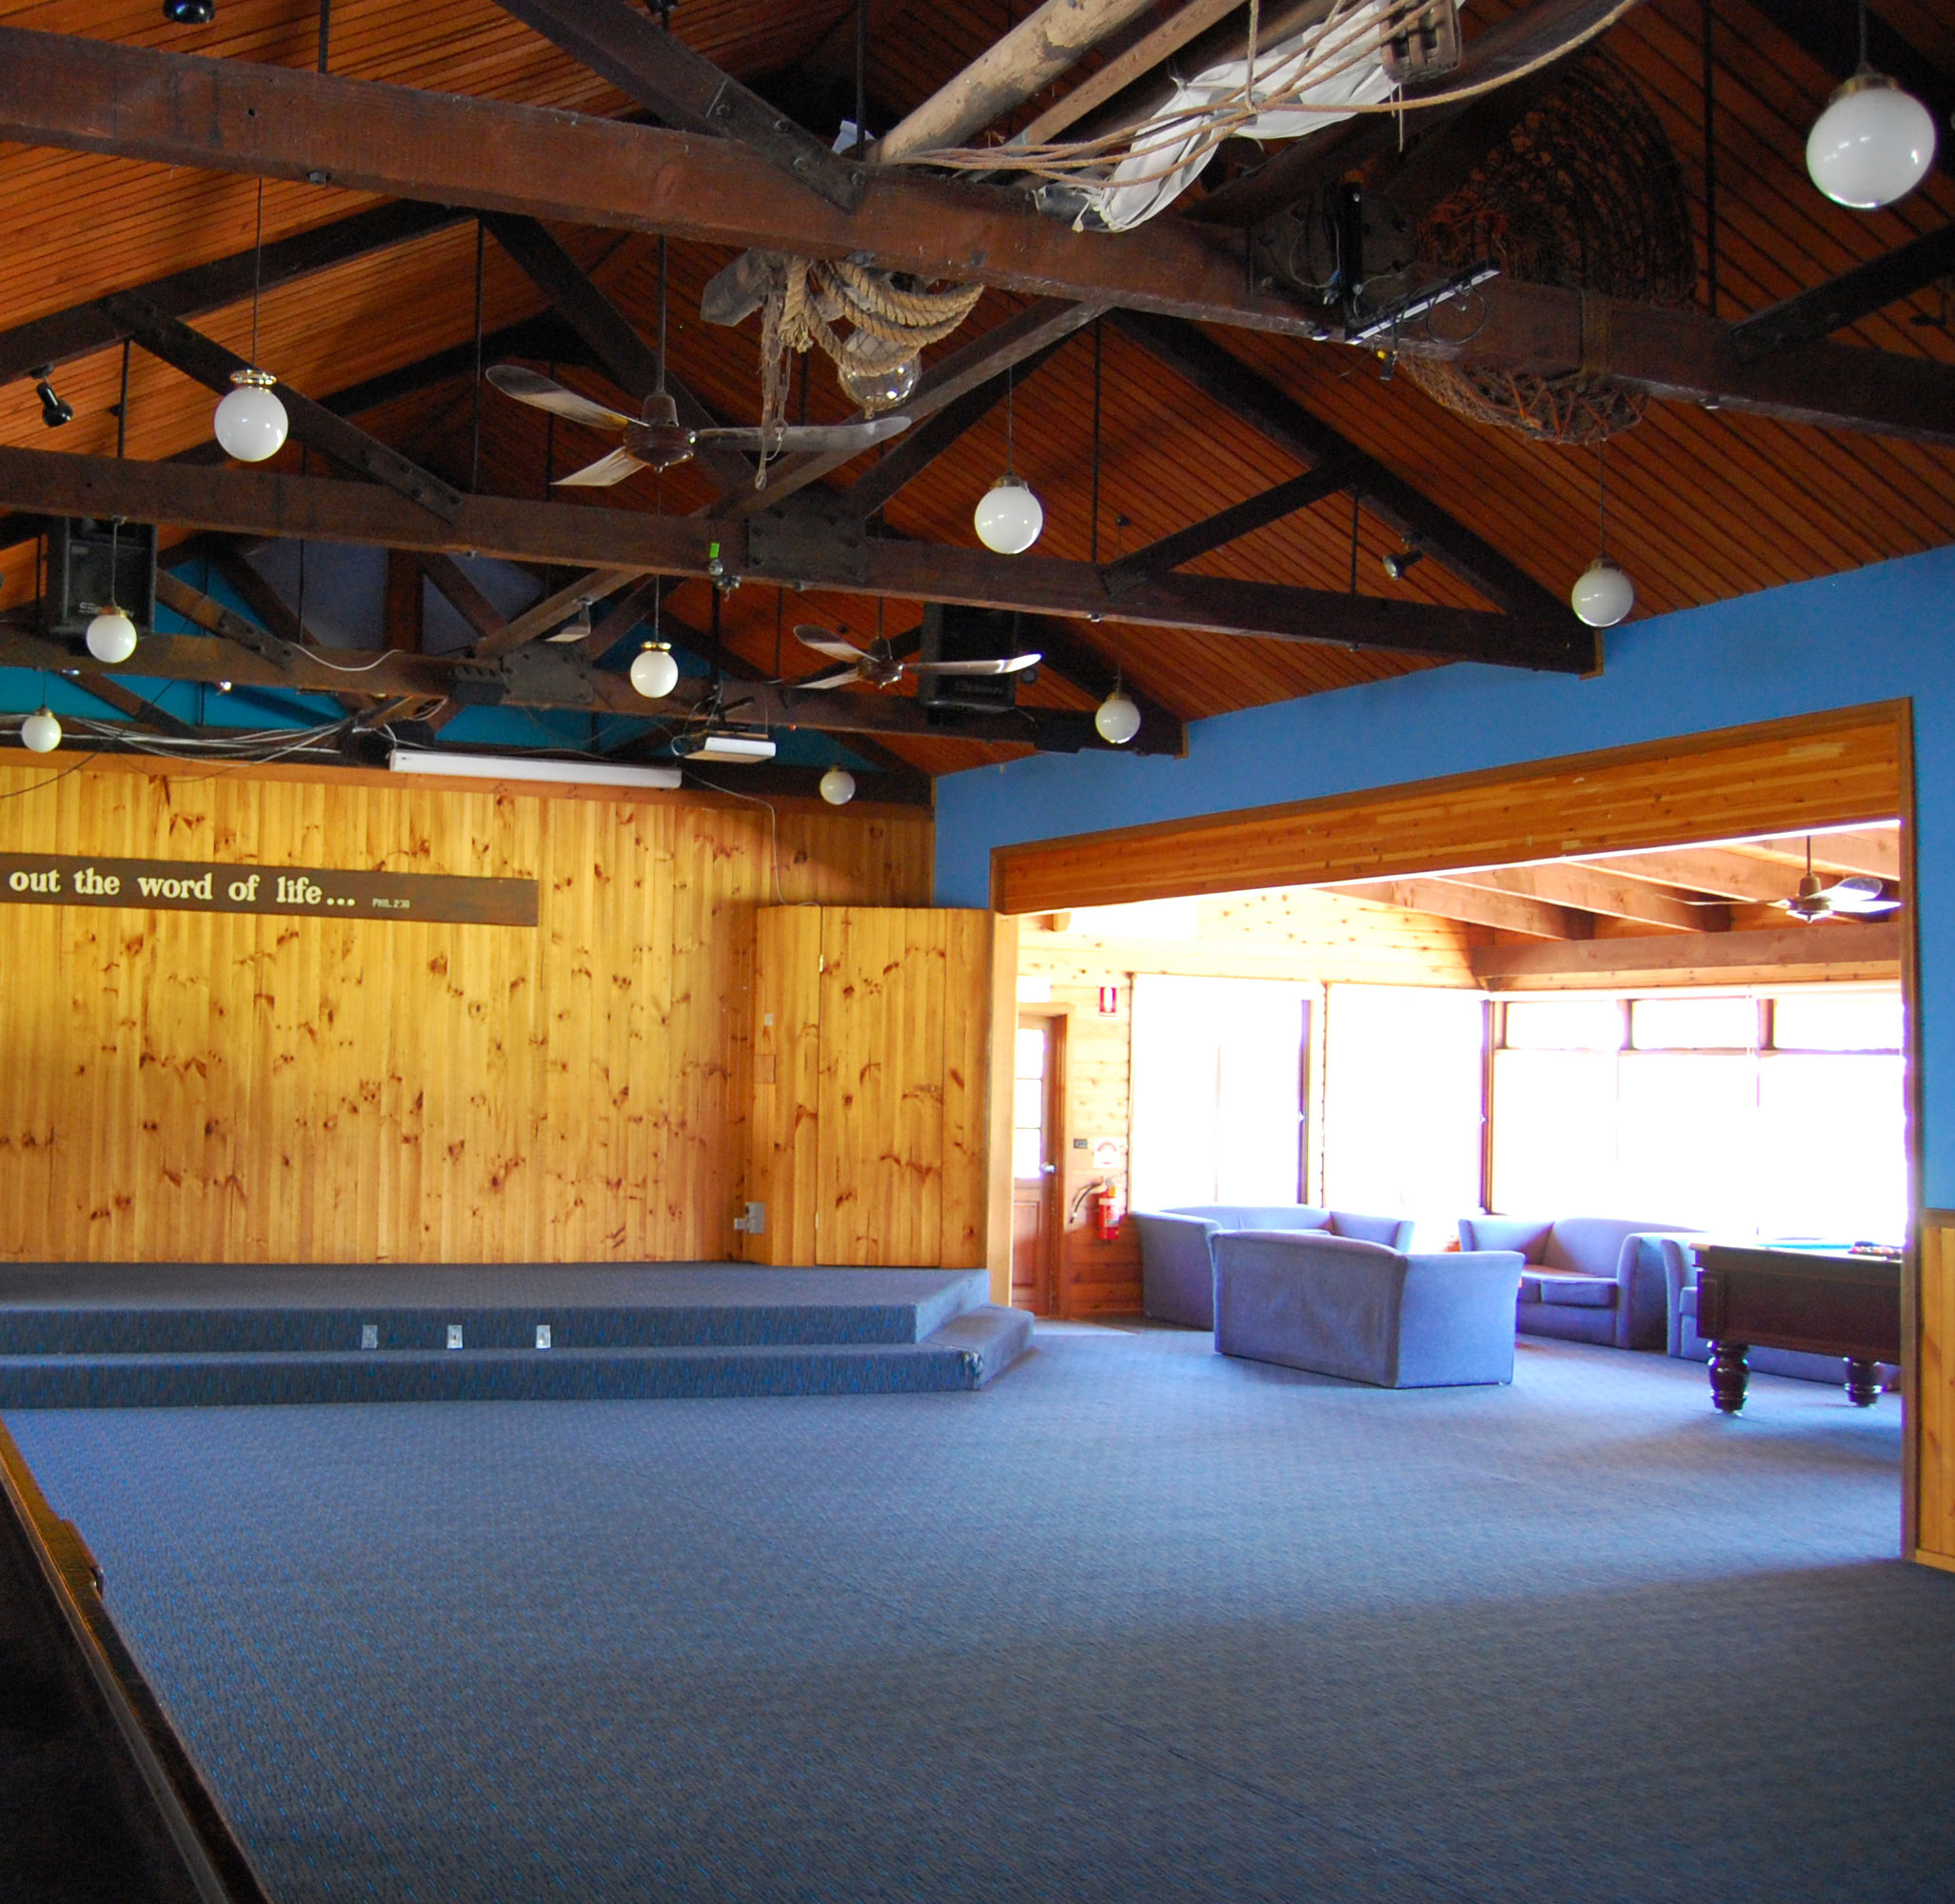 The Main Function Room